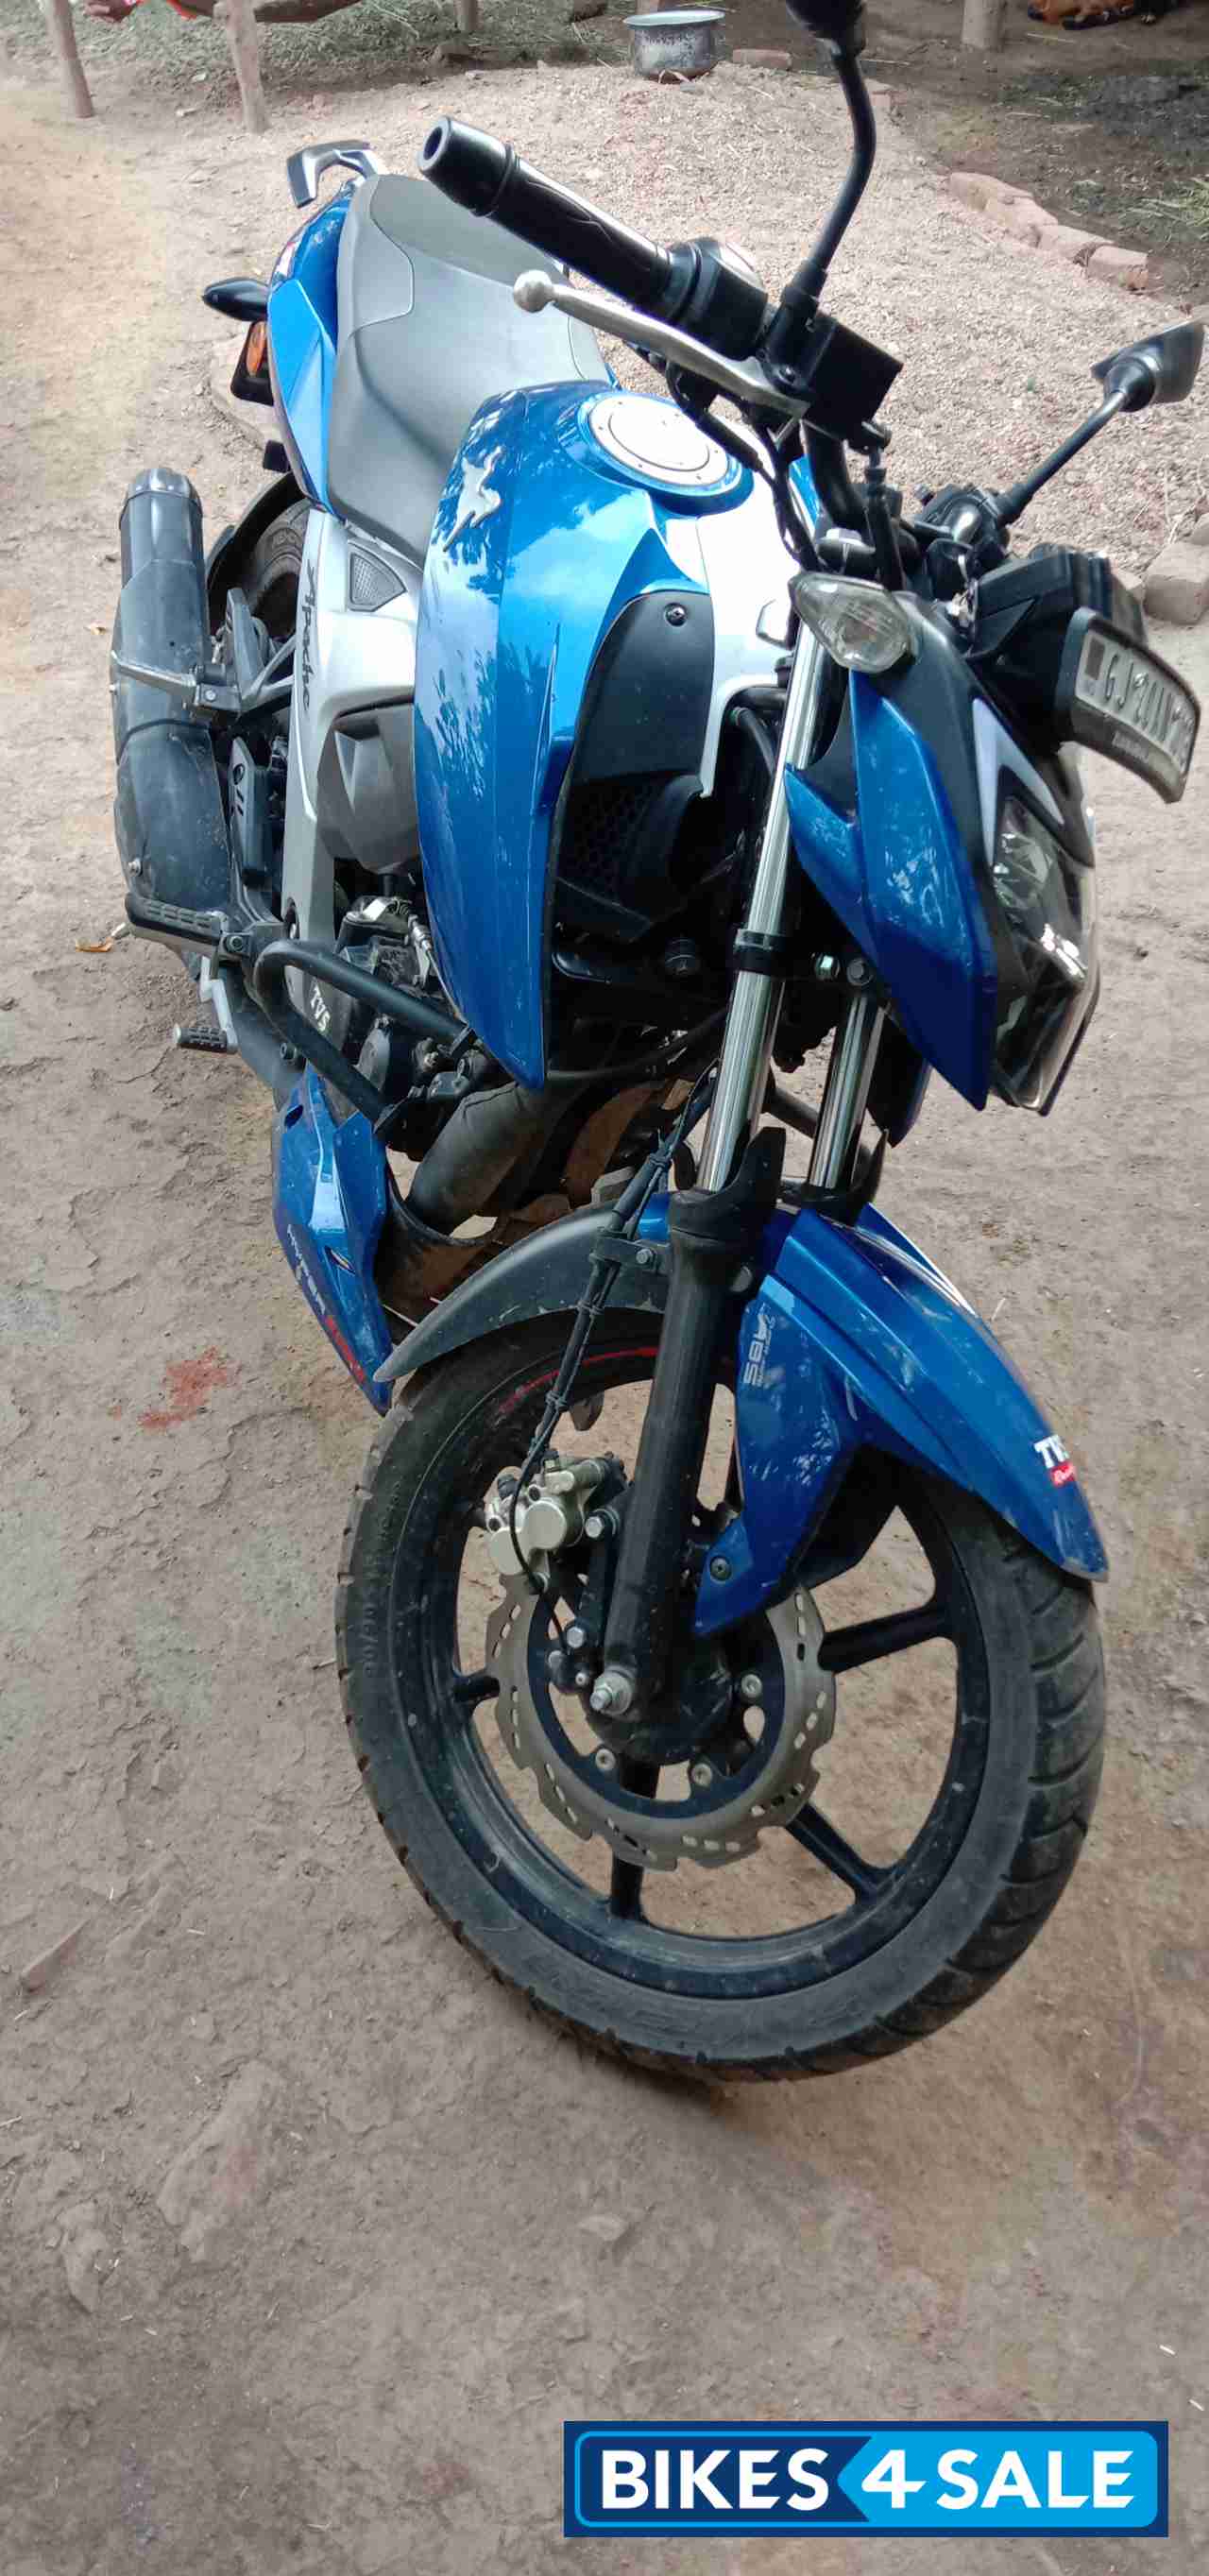 Apache Rtr 160 4v Bs6 Blue Promotions